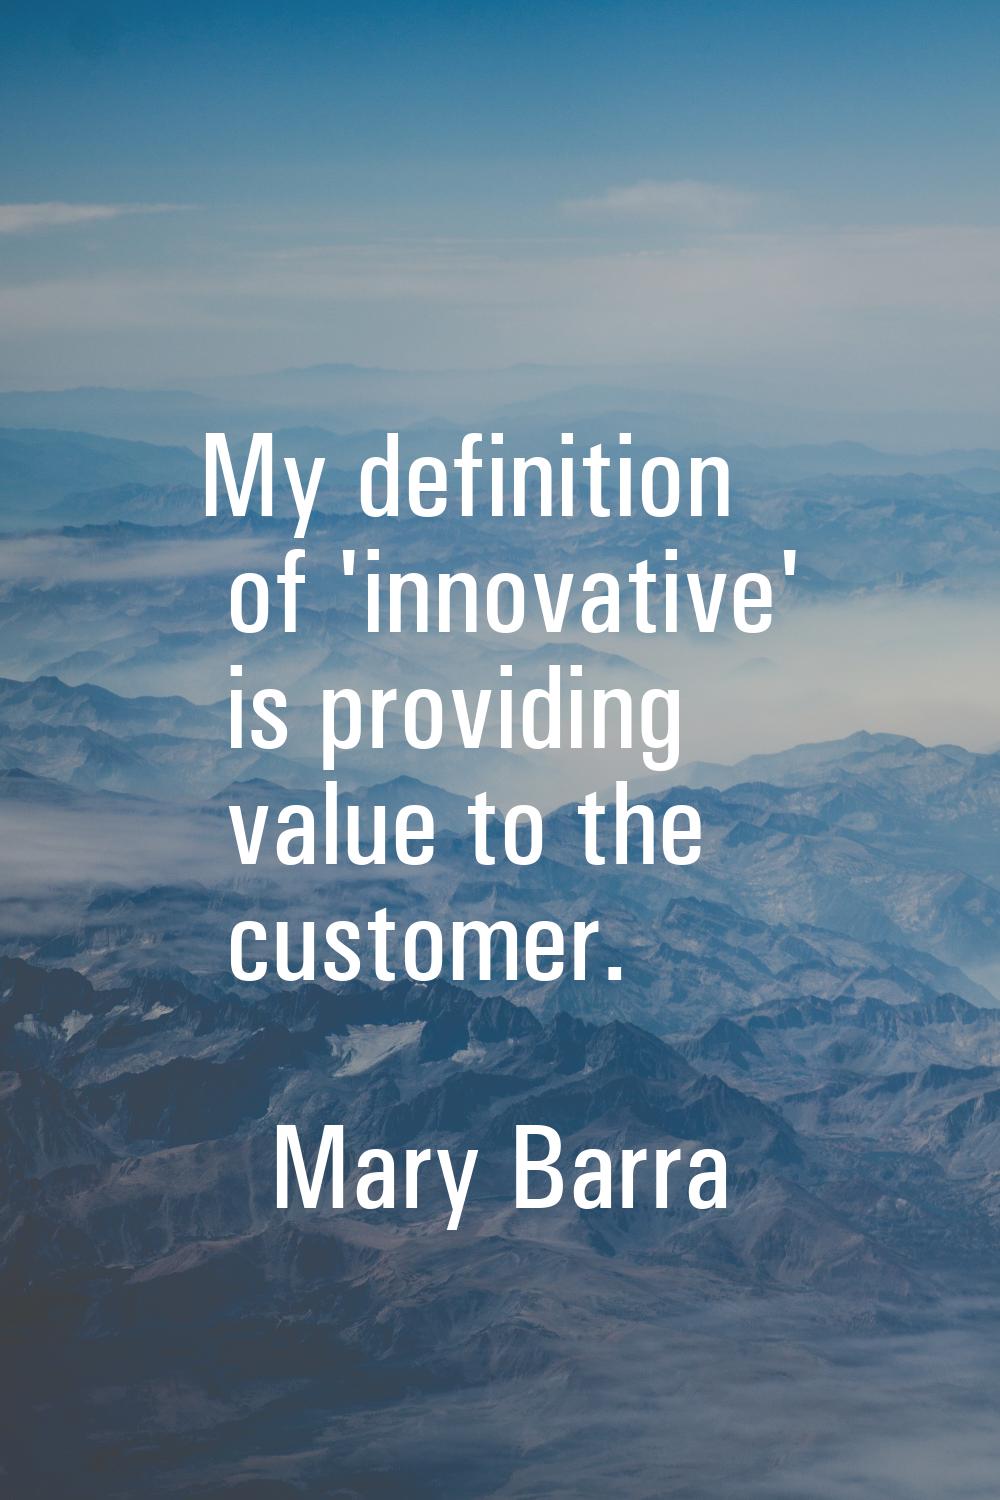 My definition of 'innovative' is providing value to the customer.